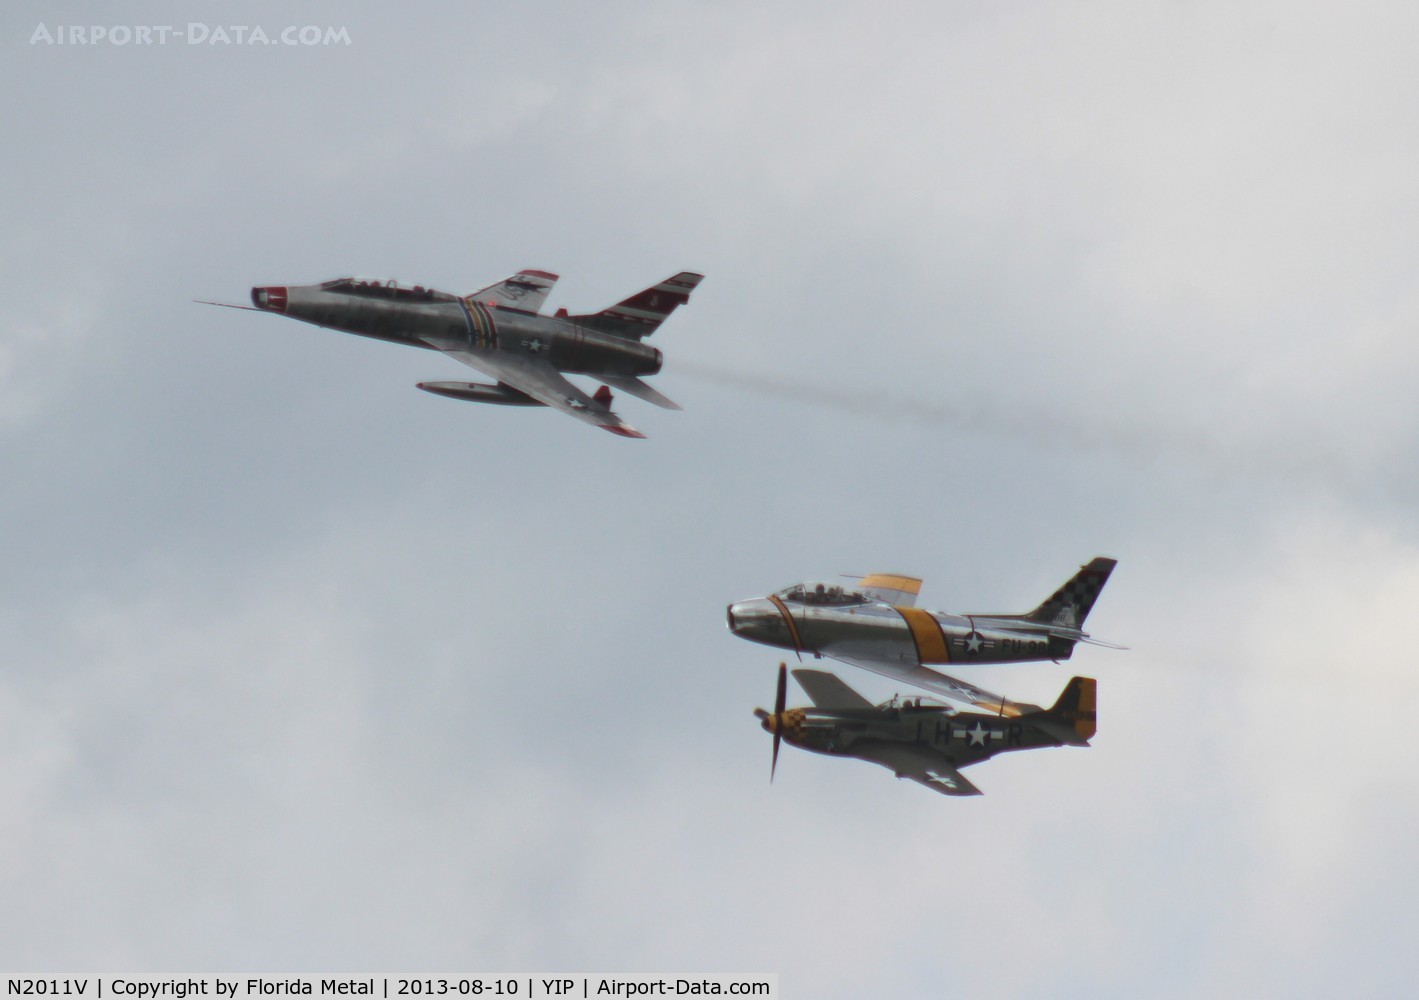 N2011V, 1958 North American F-100F Super Sabre C/N 243-224, F-100F Heritage flight with an F-86 and P-51D